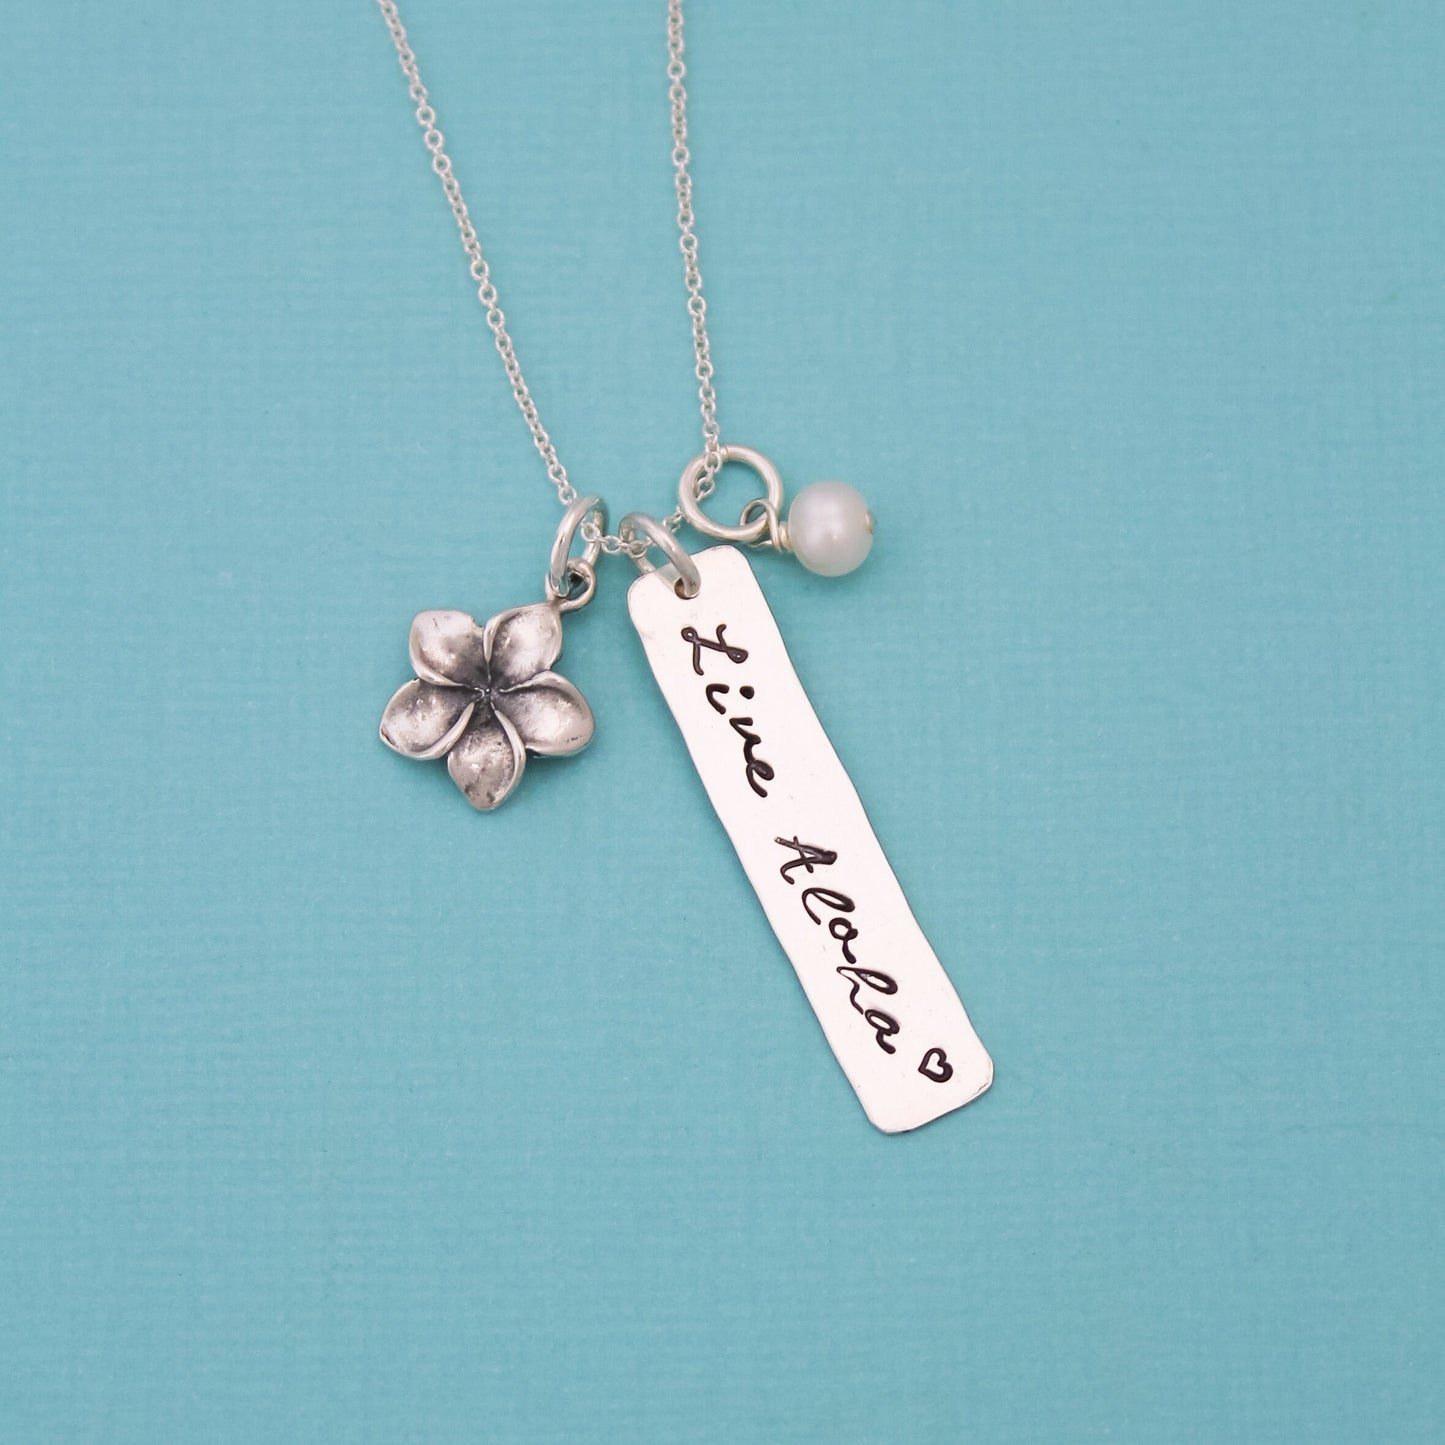 LIVE ALOHA Tag Necklace, Plumeria Necklace, Hawaiian Jewelry, Hand Stamped Necklace, Personalized Jewelry, Gifts for Her